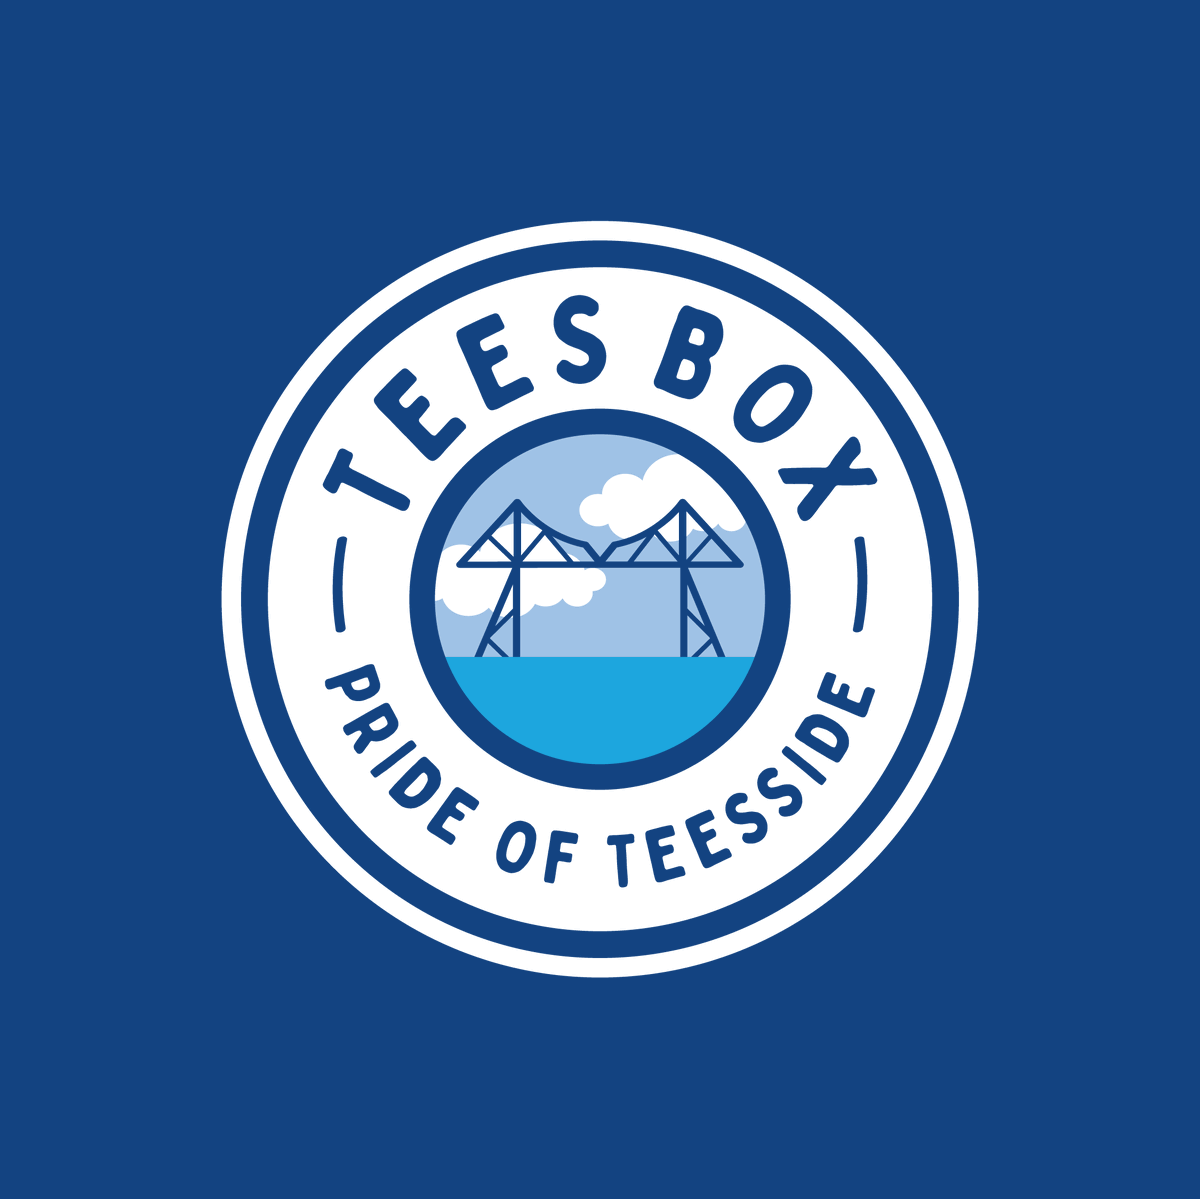 👋 Hey Twitter 👋 We're @TheTeesBoxHQ and we're absolutely buzzing to be going live to Teesside and the world today! We showcase the latest, coolest and finest independent brands that Teesside has to offer in one box. Give us a follow and join our journey #UTB